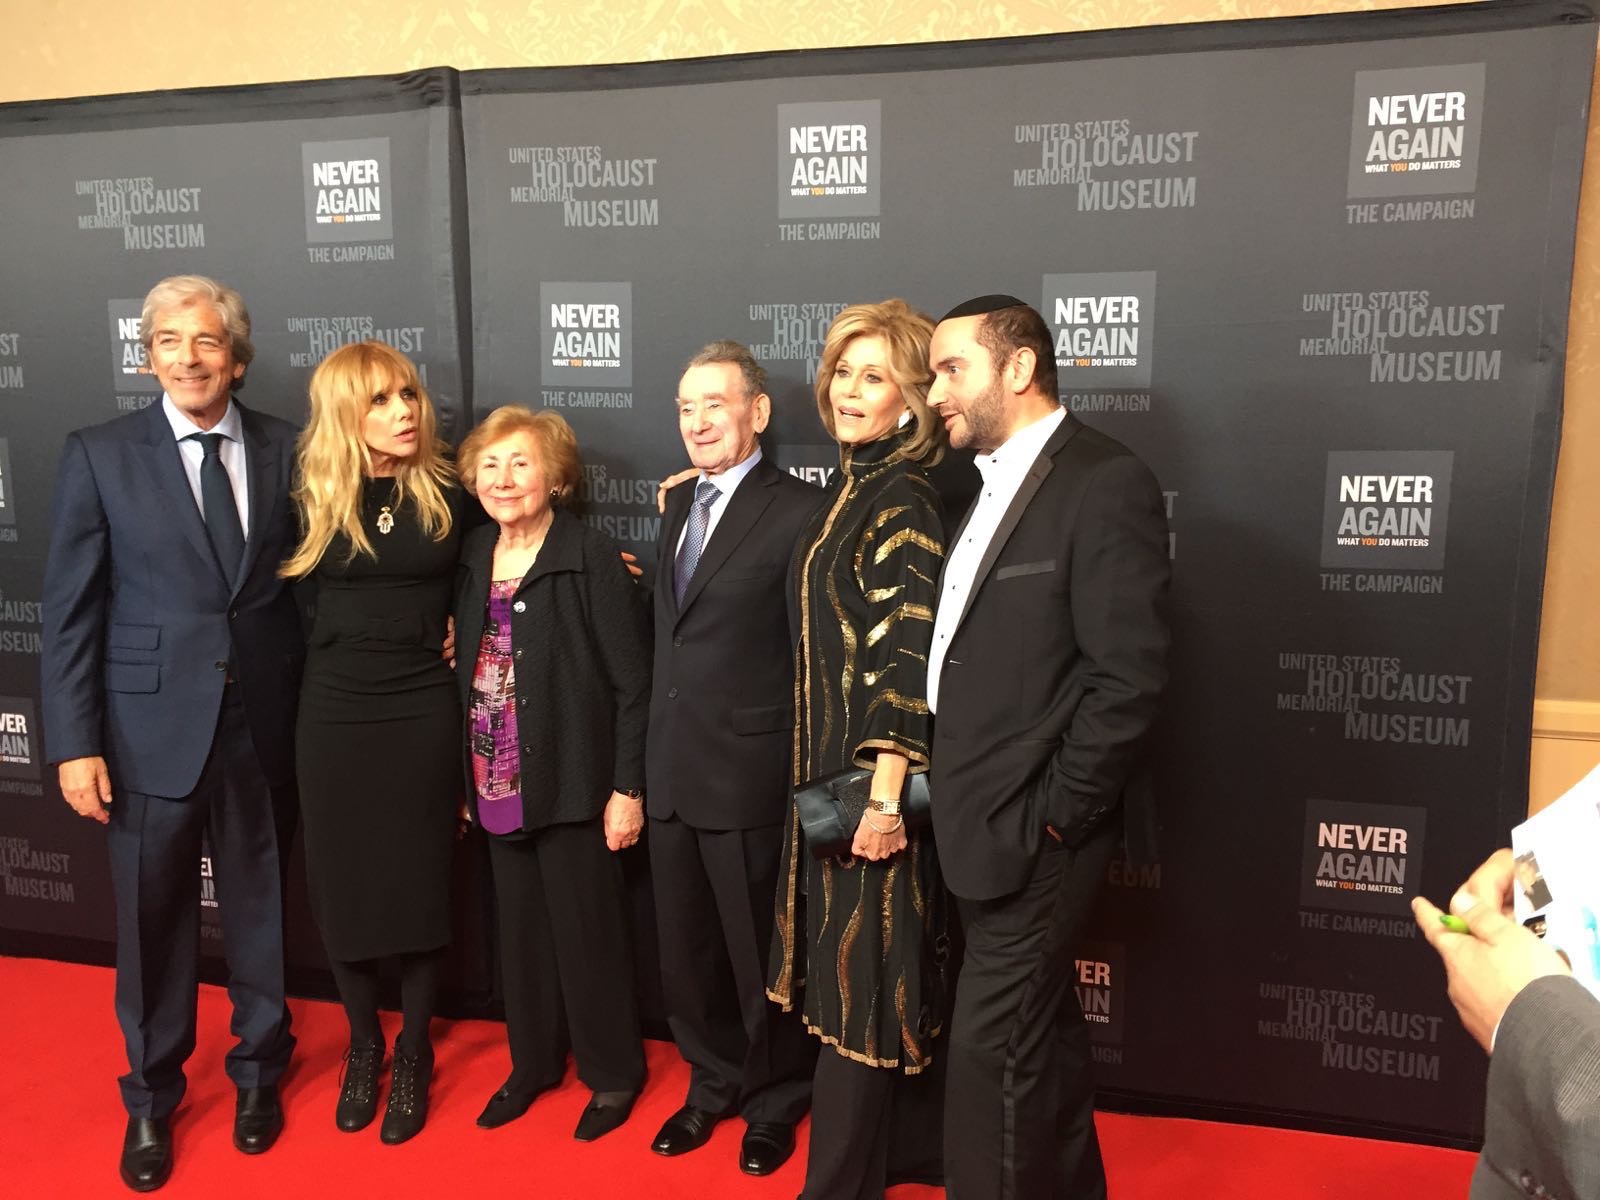 Rabbi Dunner on the red carpet at the USMOTH 2016 Banquet, with Jane Fonda and Rosanne Arquette, Beverly Hilton Hotel (March 2016)